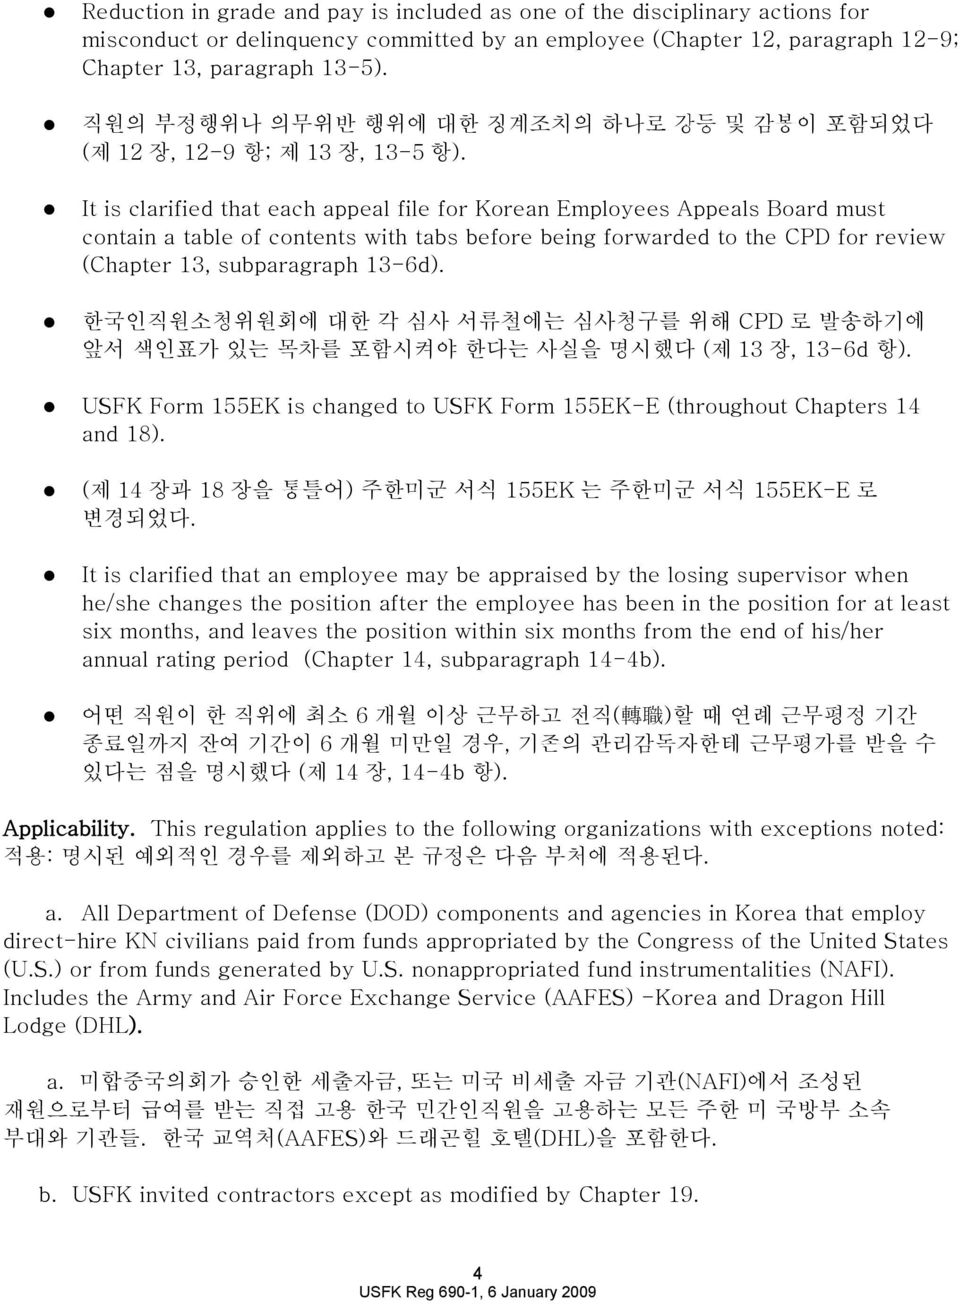 It is clarified that each appeal file for Korean Employees Appeals Board must contain a table of contents with tabs before being forwarded to the CPD for review (Chapter 13, subparagraph 13-6d).